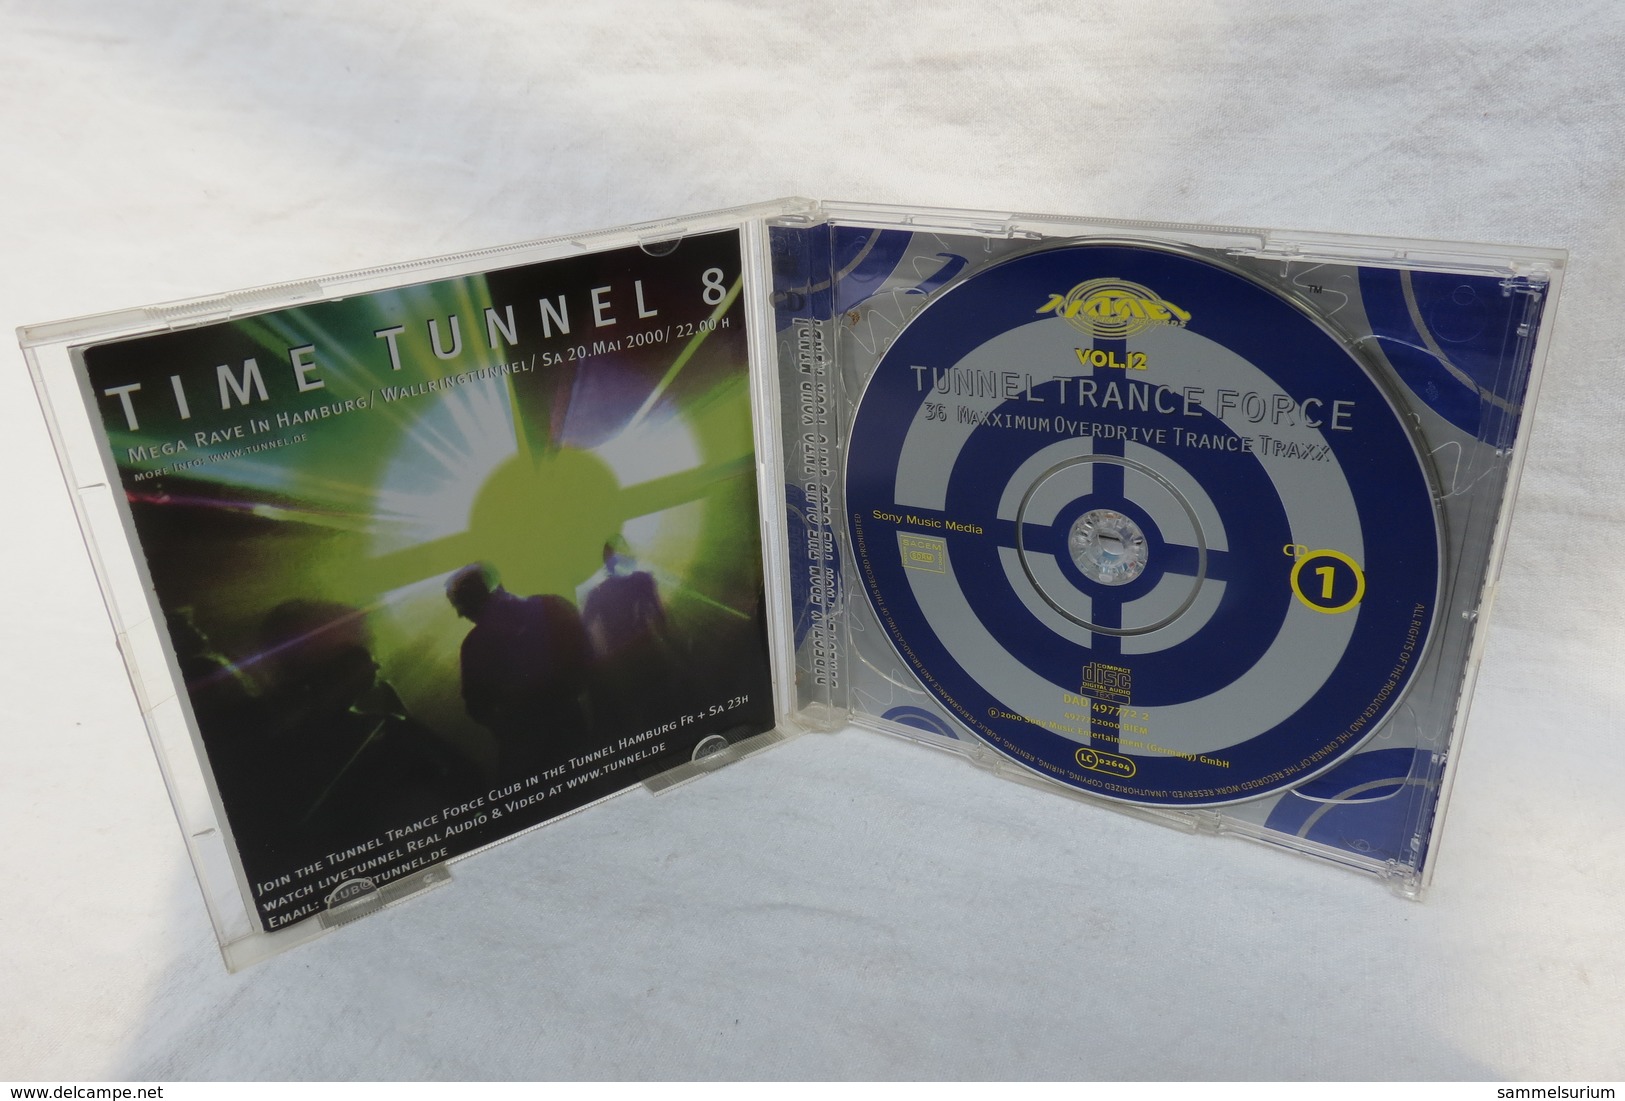 2 CDs "Tunnel Trance Force" Vol. 12 - Dance, Techno & House